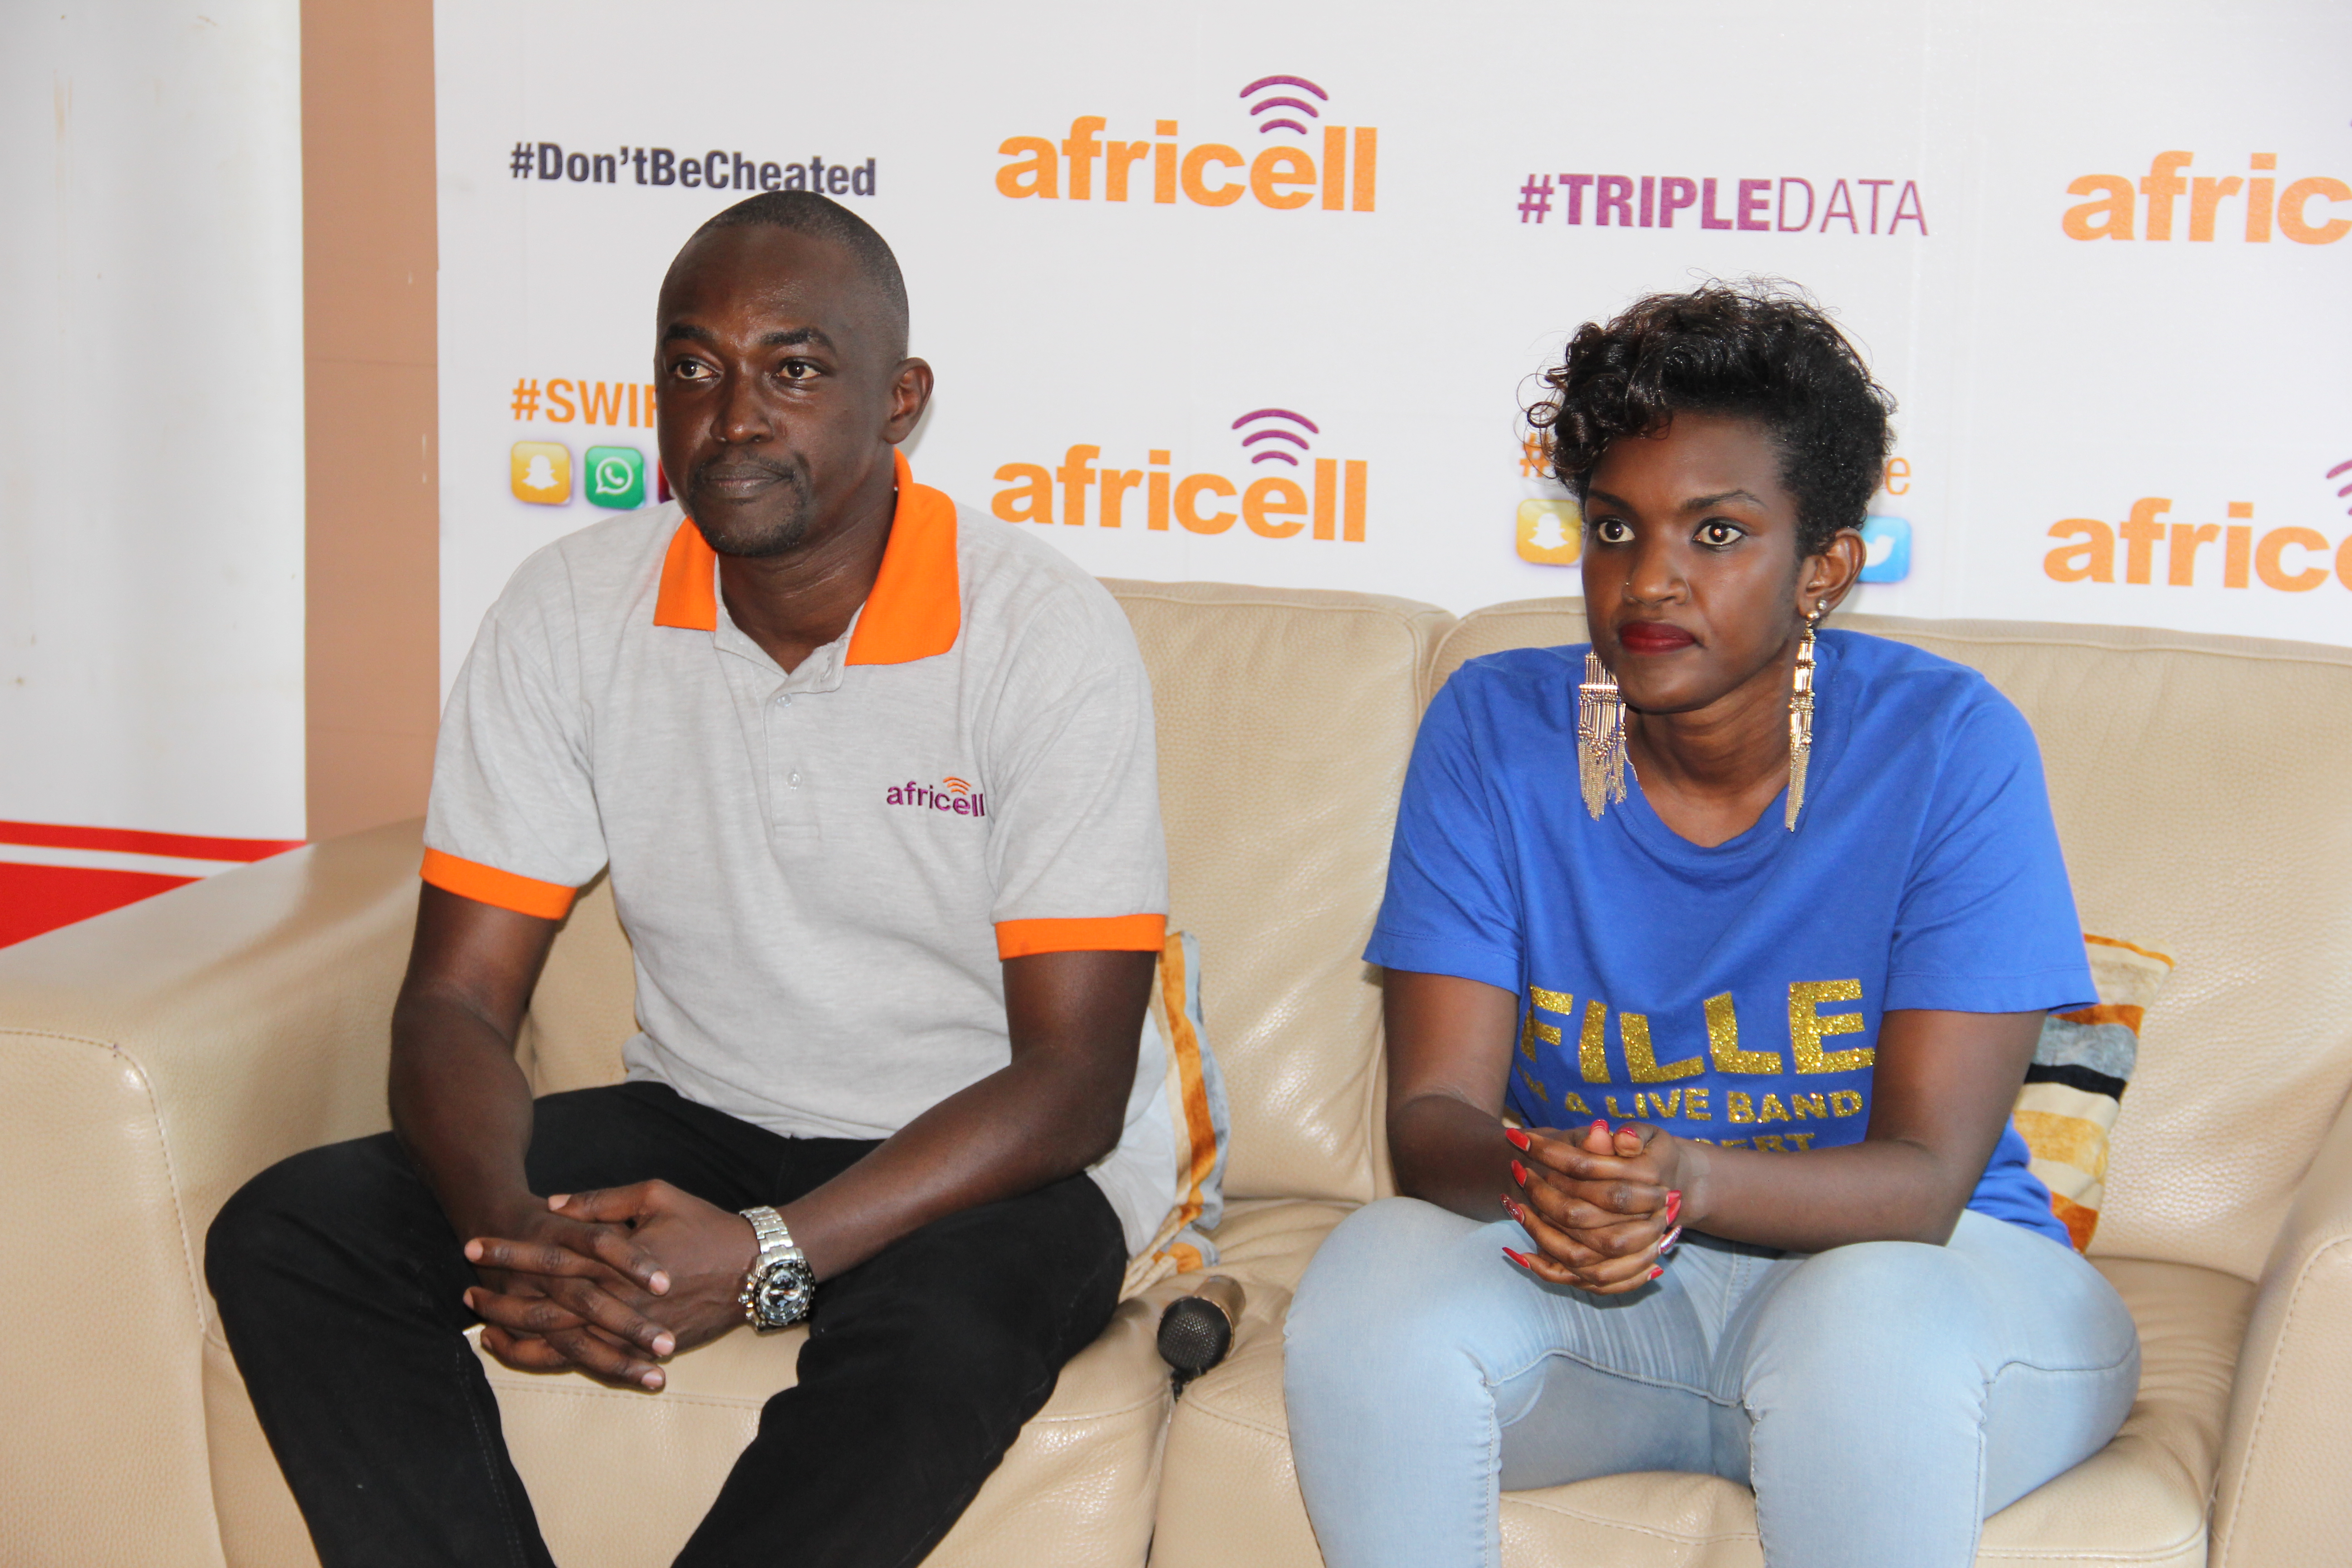 Africell Gives Fille Live Band Concert a 30M Boost